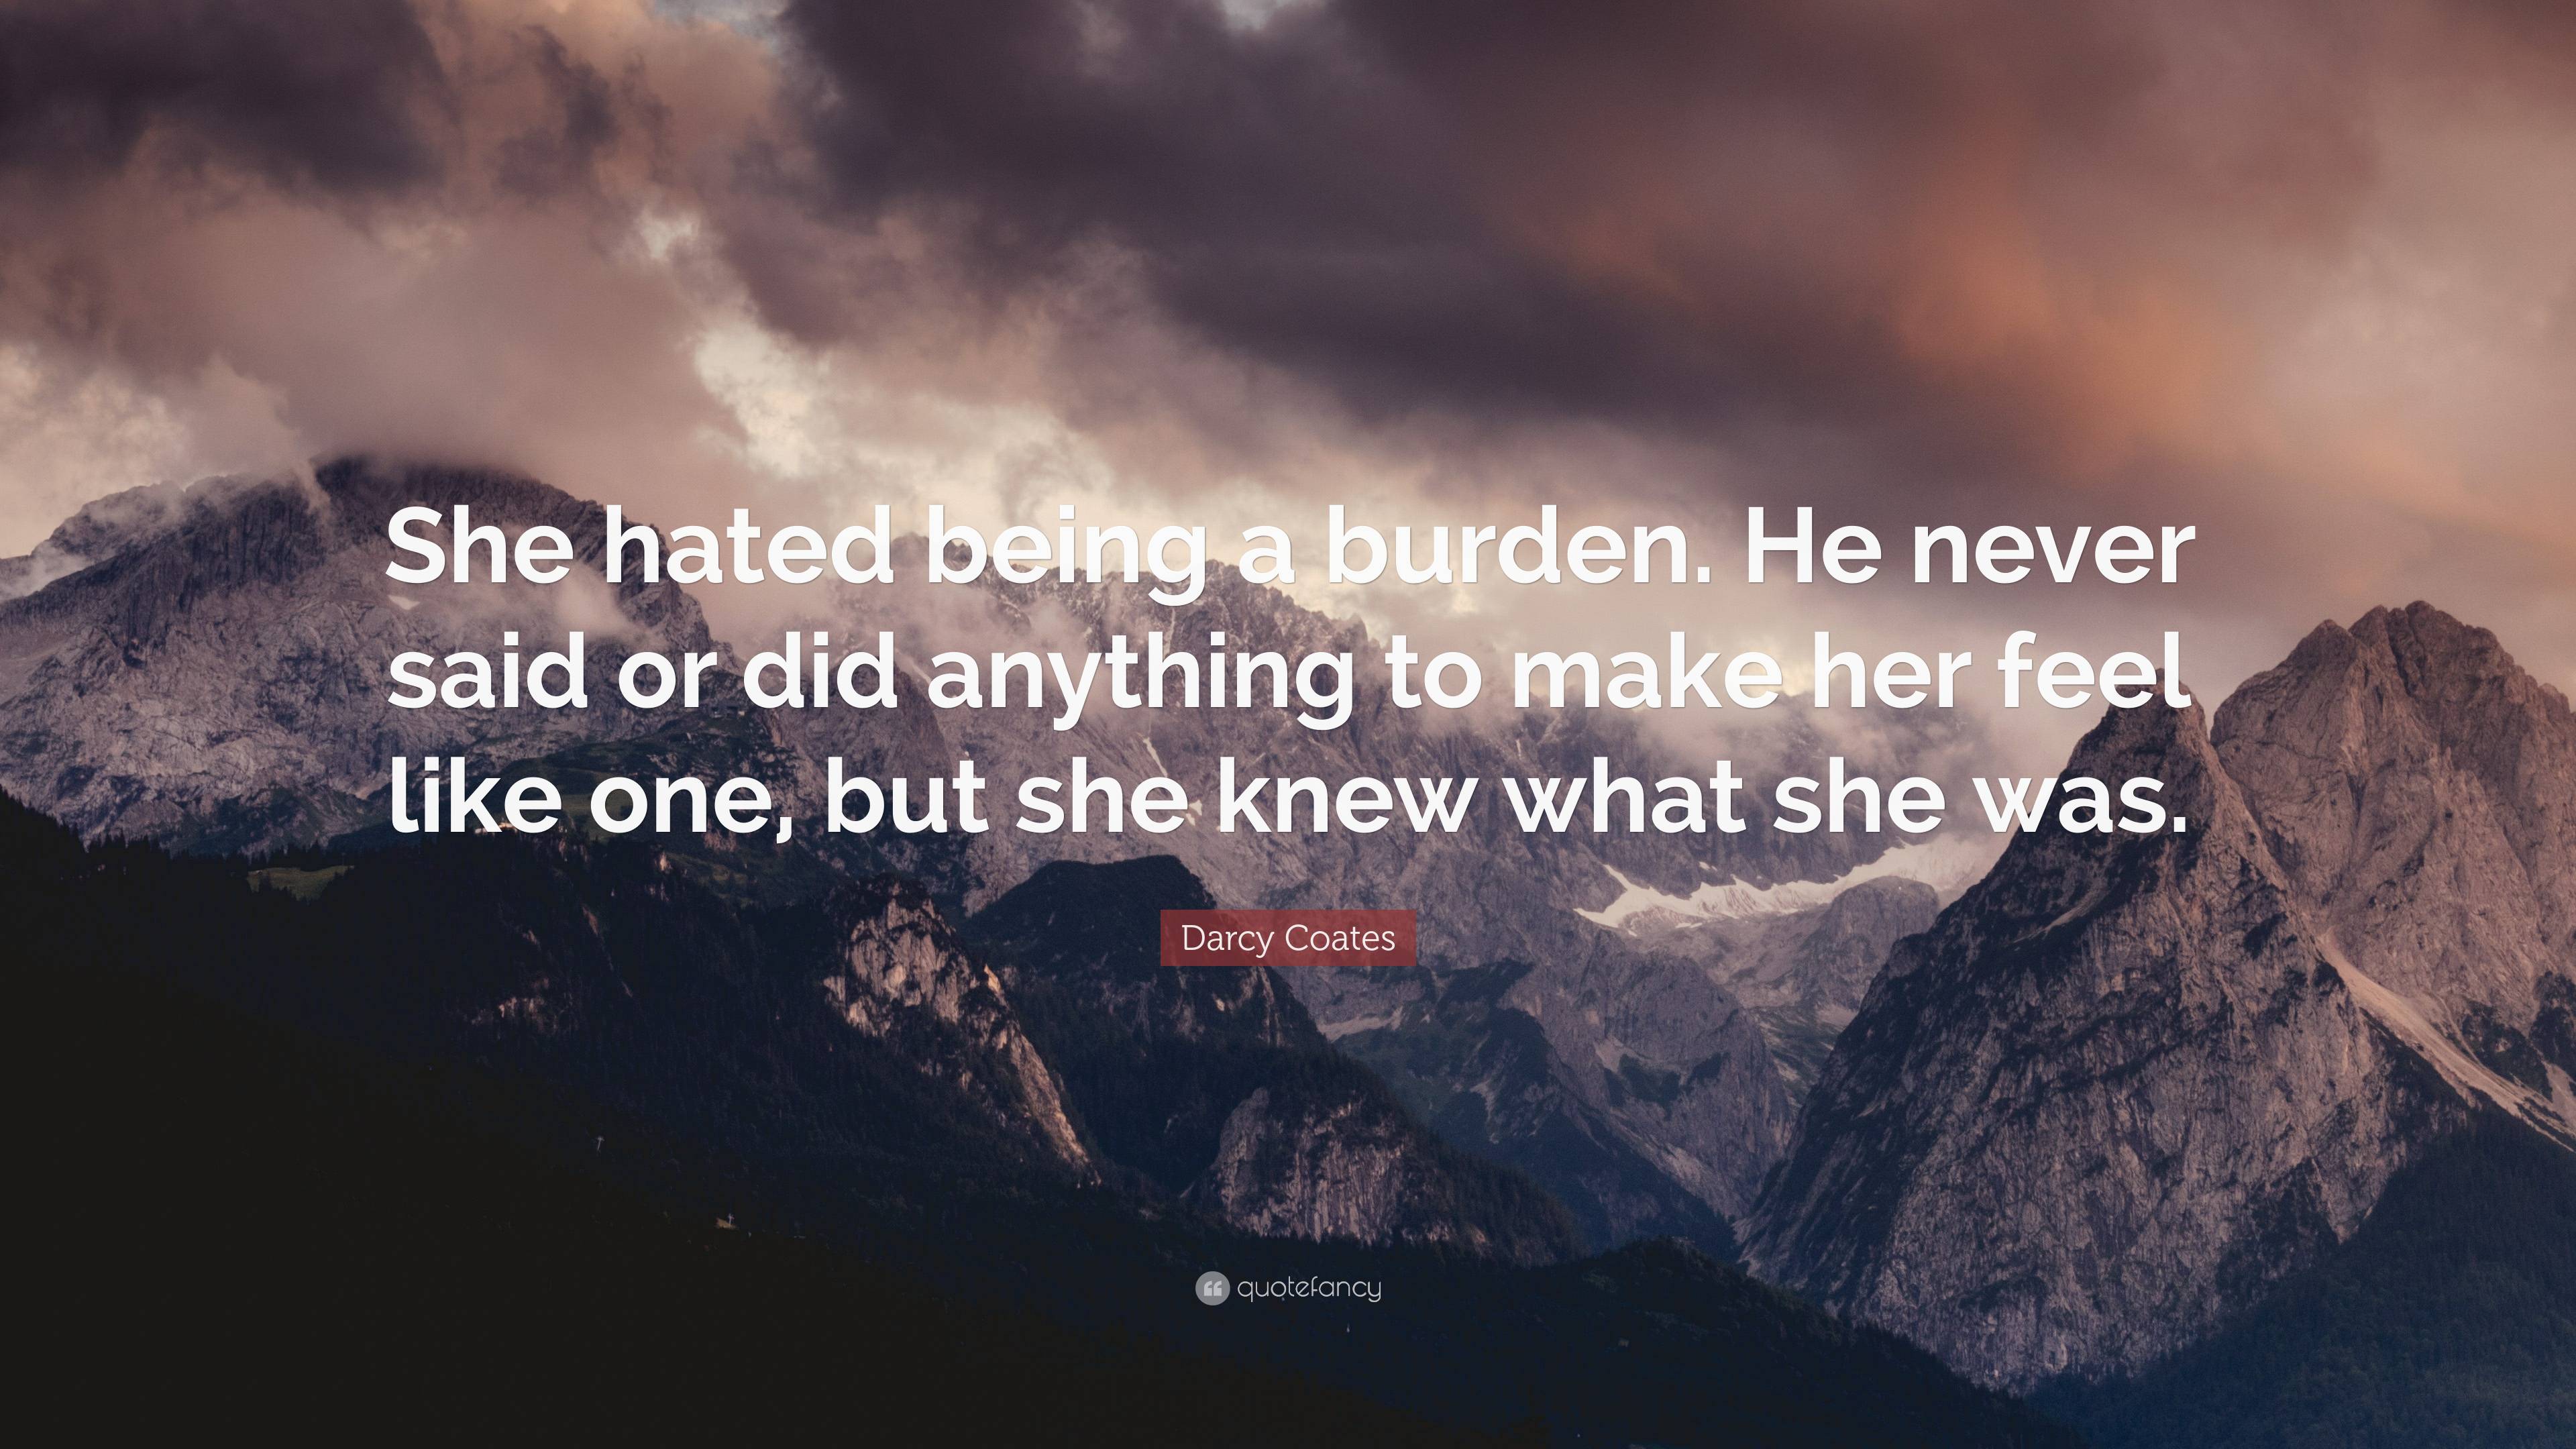 Darcy Coates Quote: “She hated being a burden. He never said or did ...